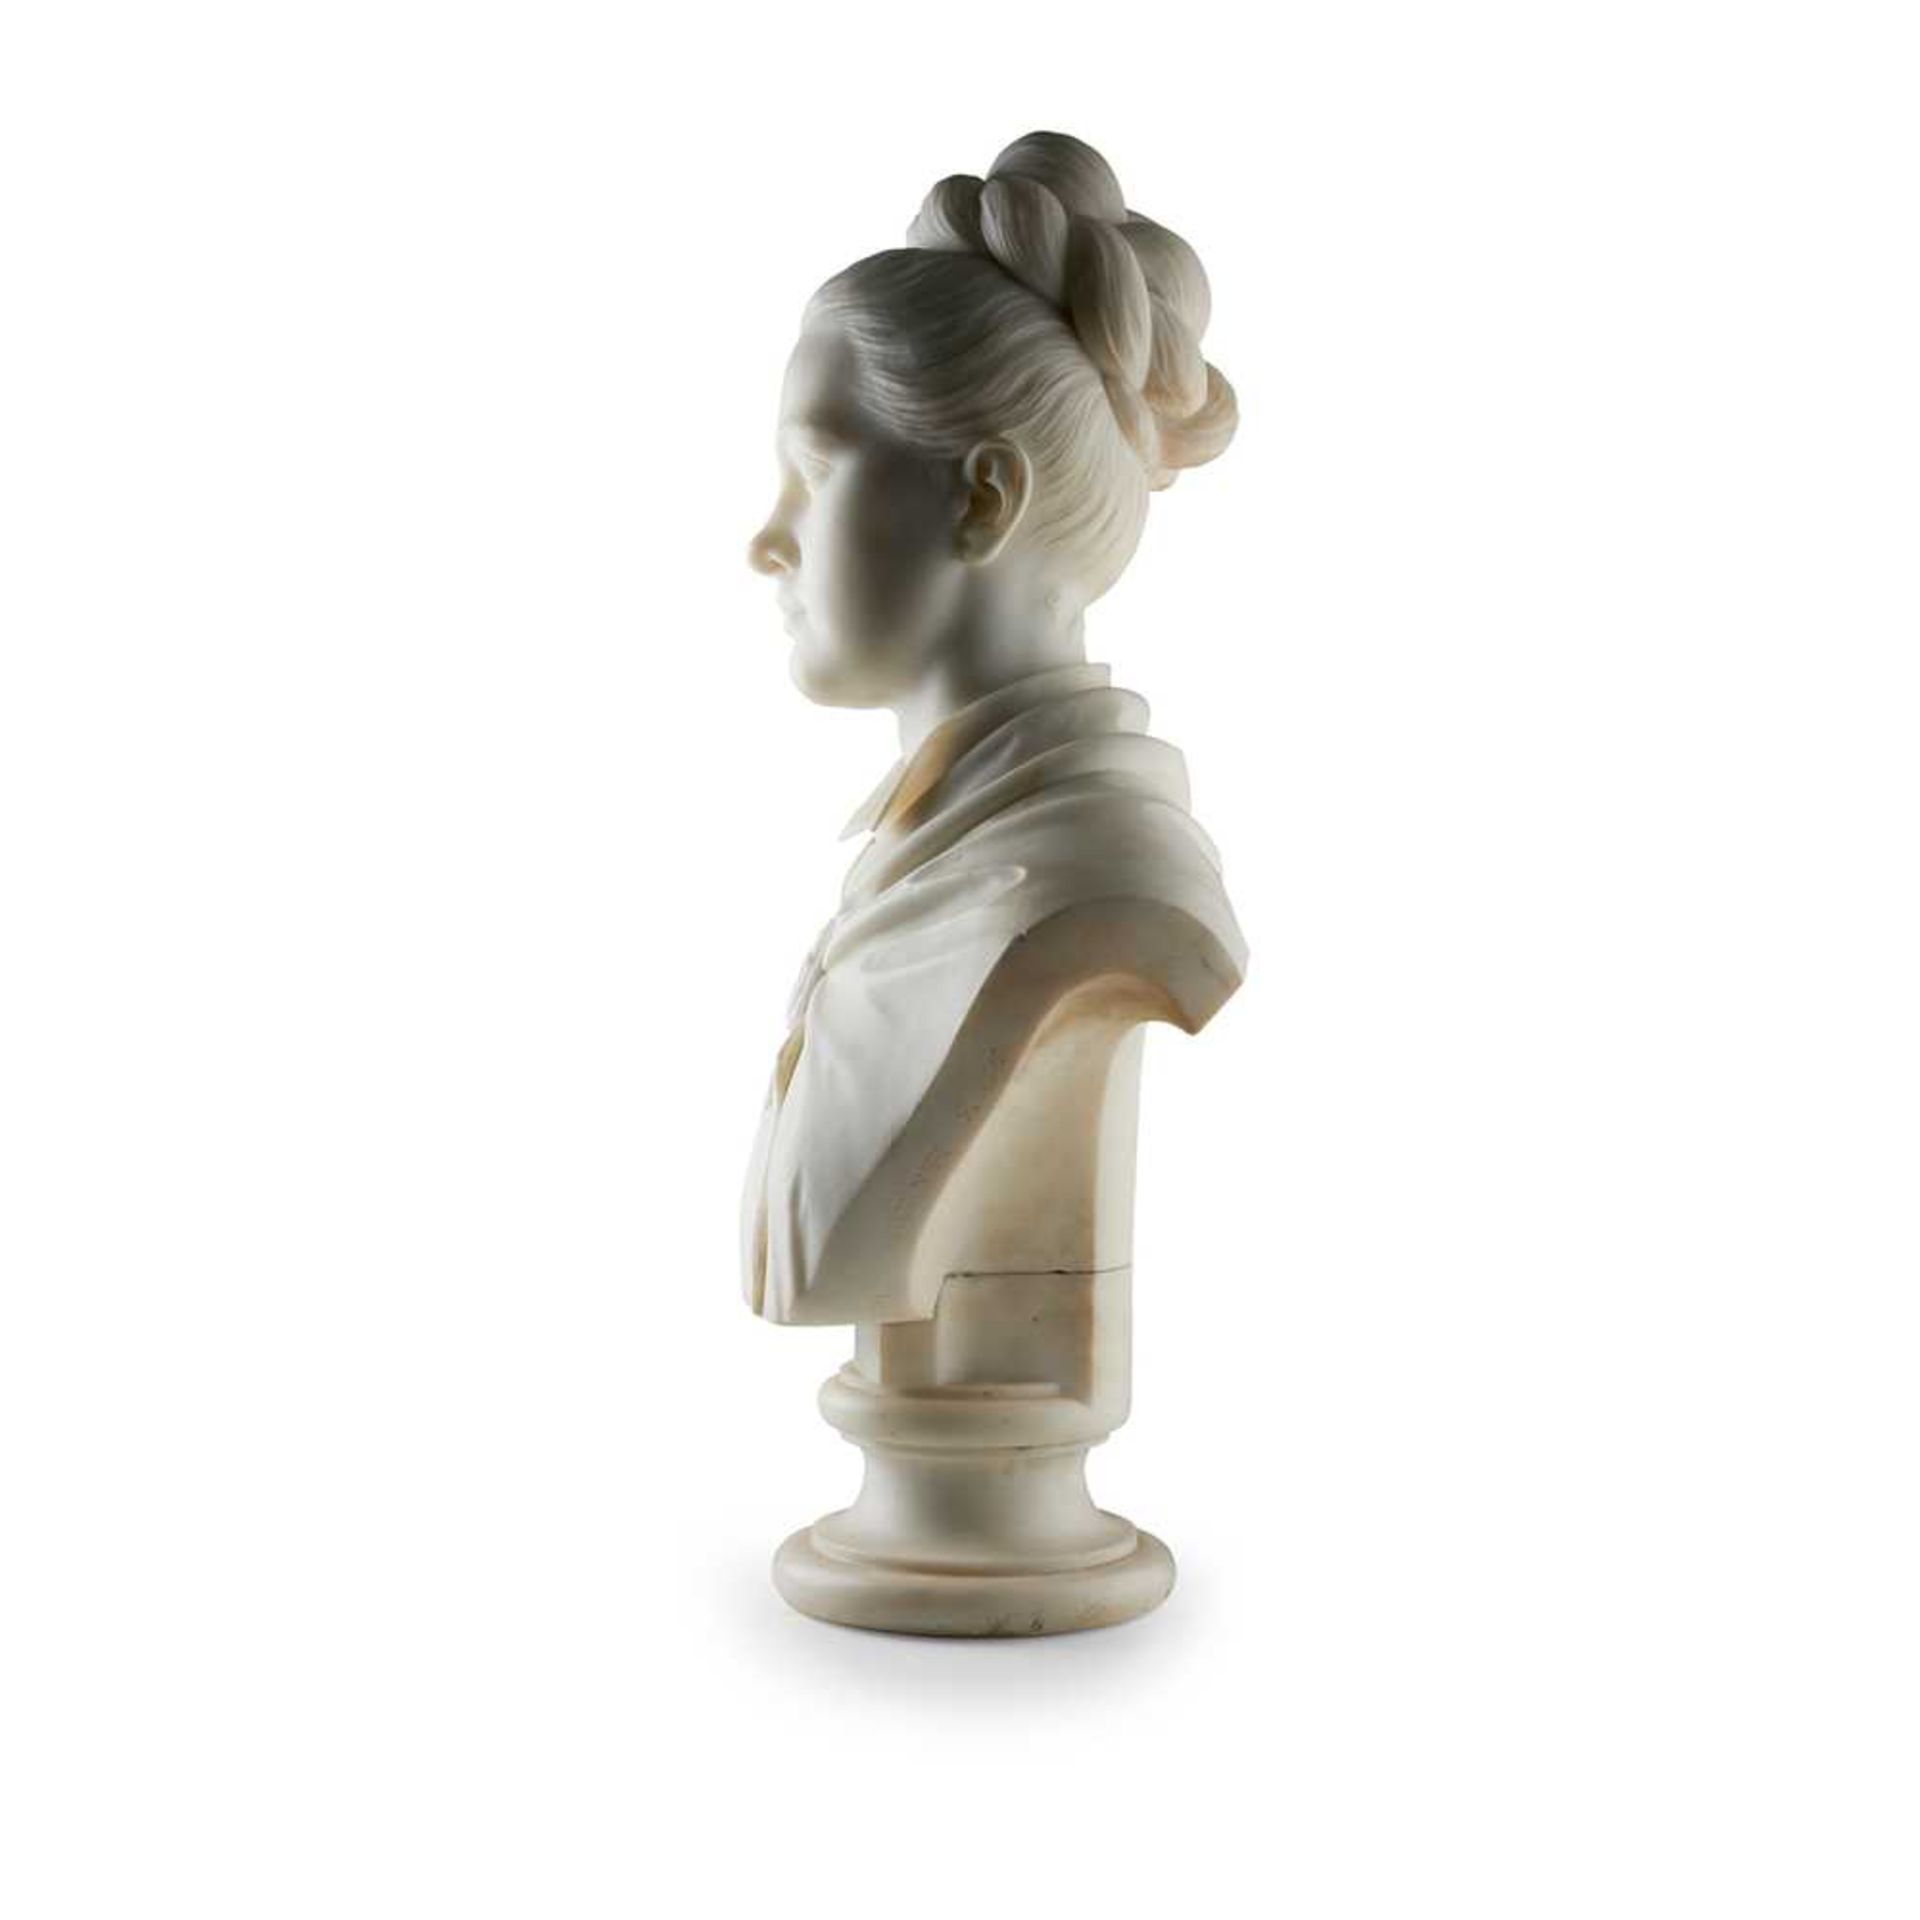 GIOSUÈ ARGENTI (ITALIAN, 1819-1901) MARBLE BUST OF A YOUNG WOMAN, DATED 1875 - Image 3 of 5